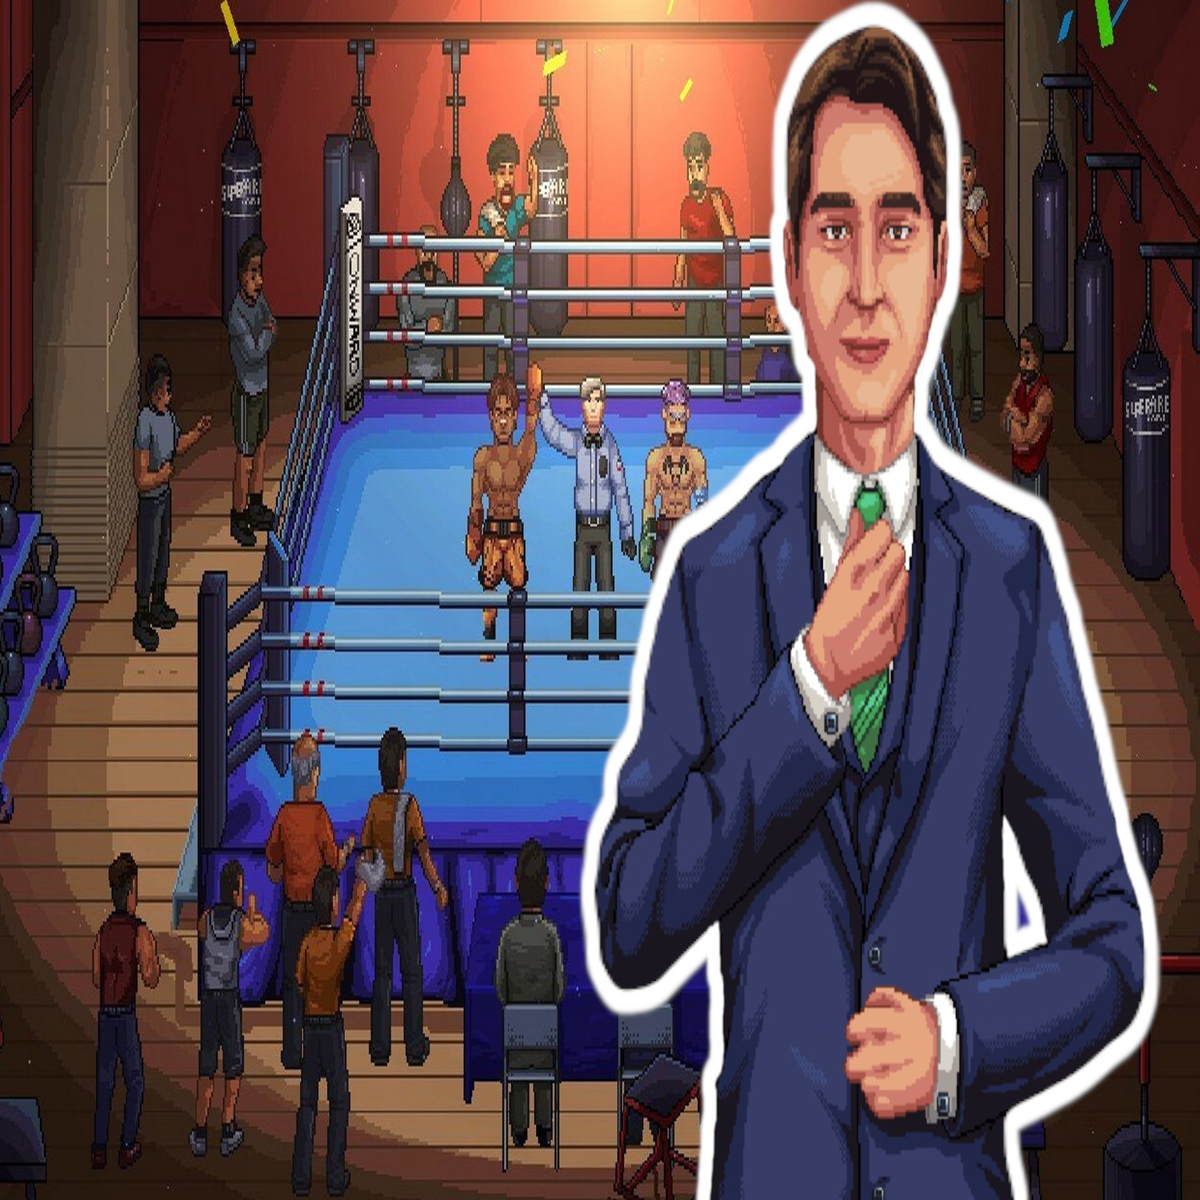 World Championship Boxing Manager™ 2 gameplay 